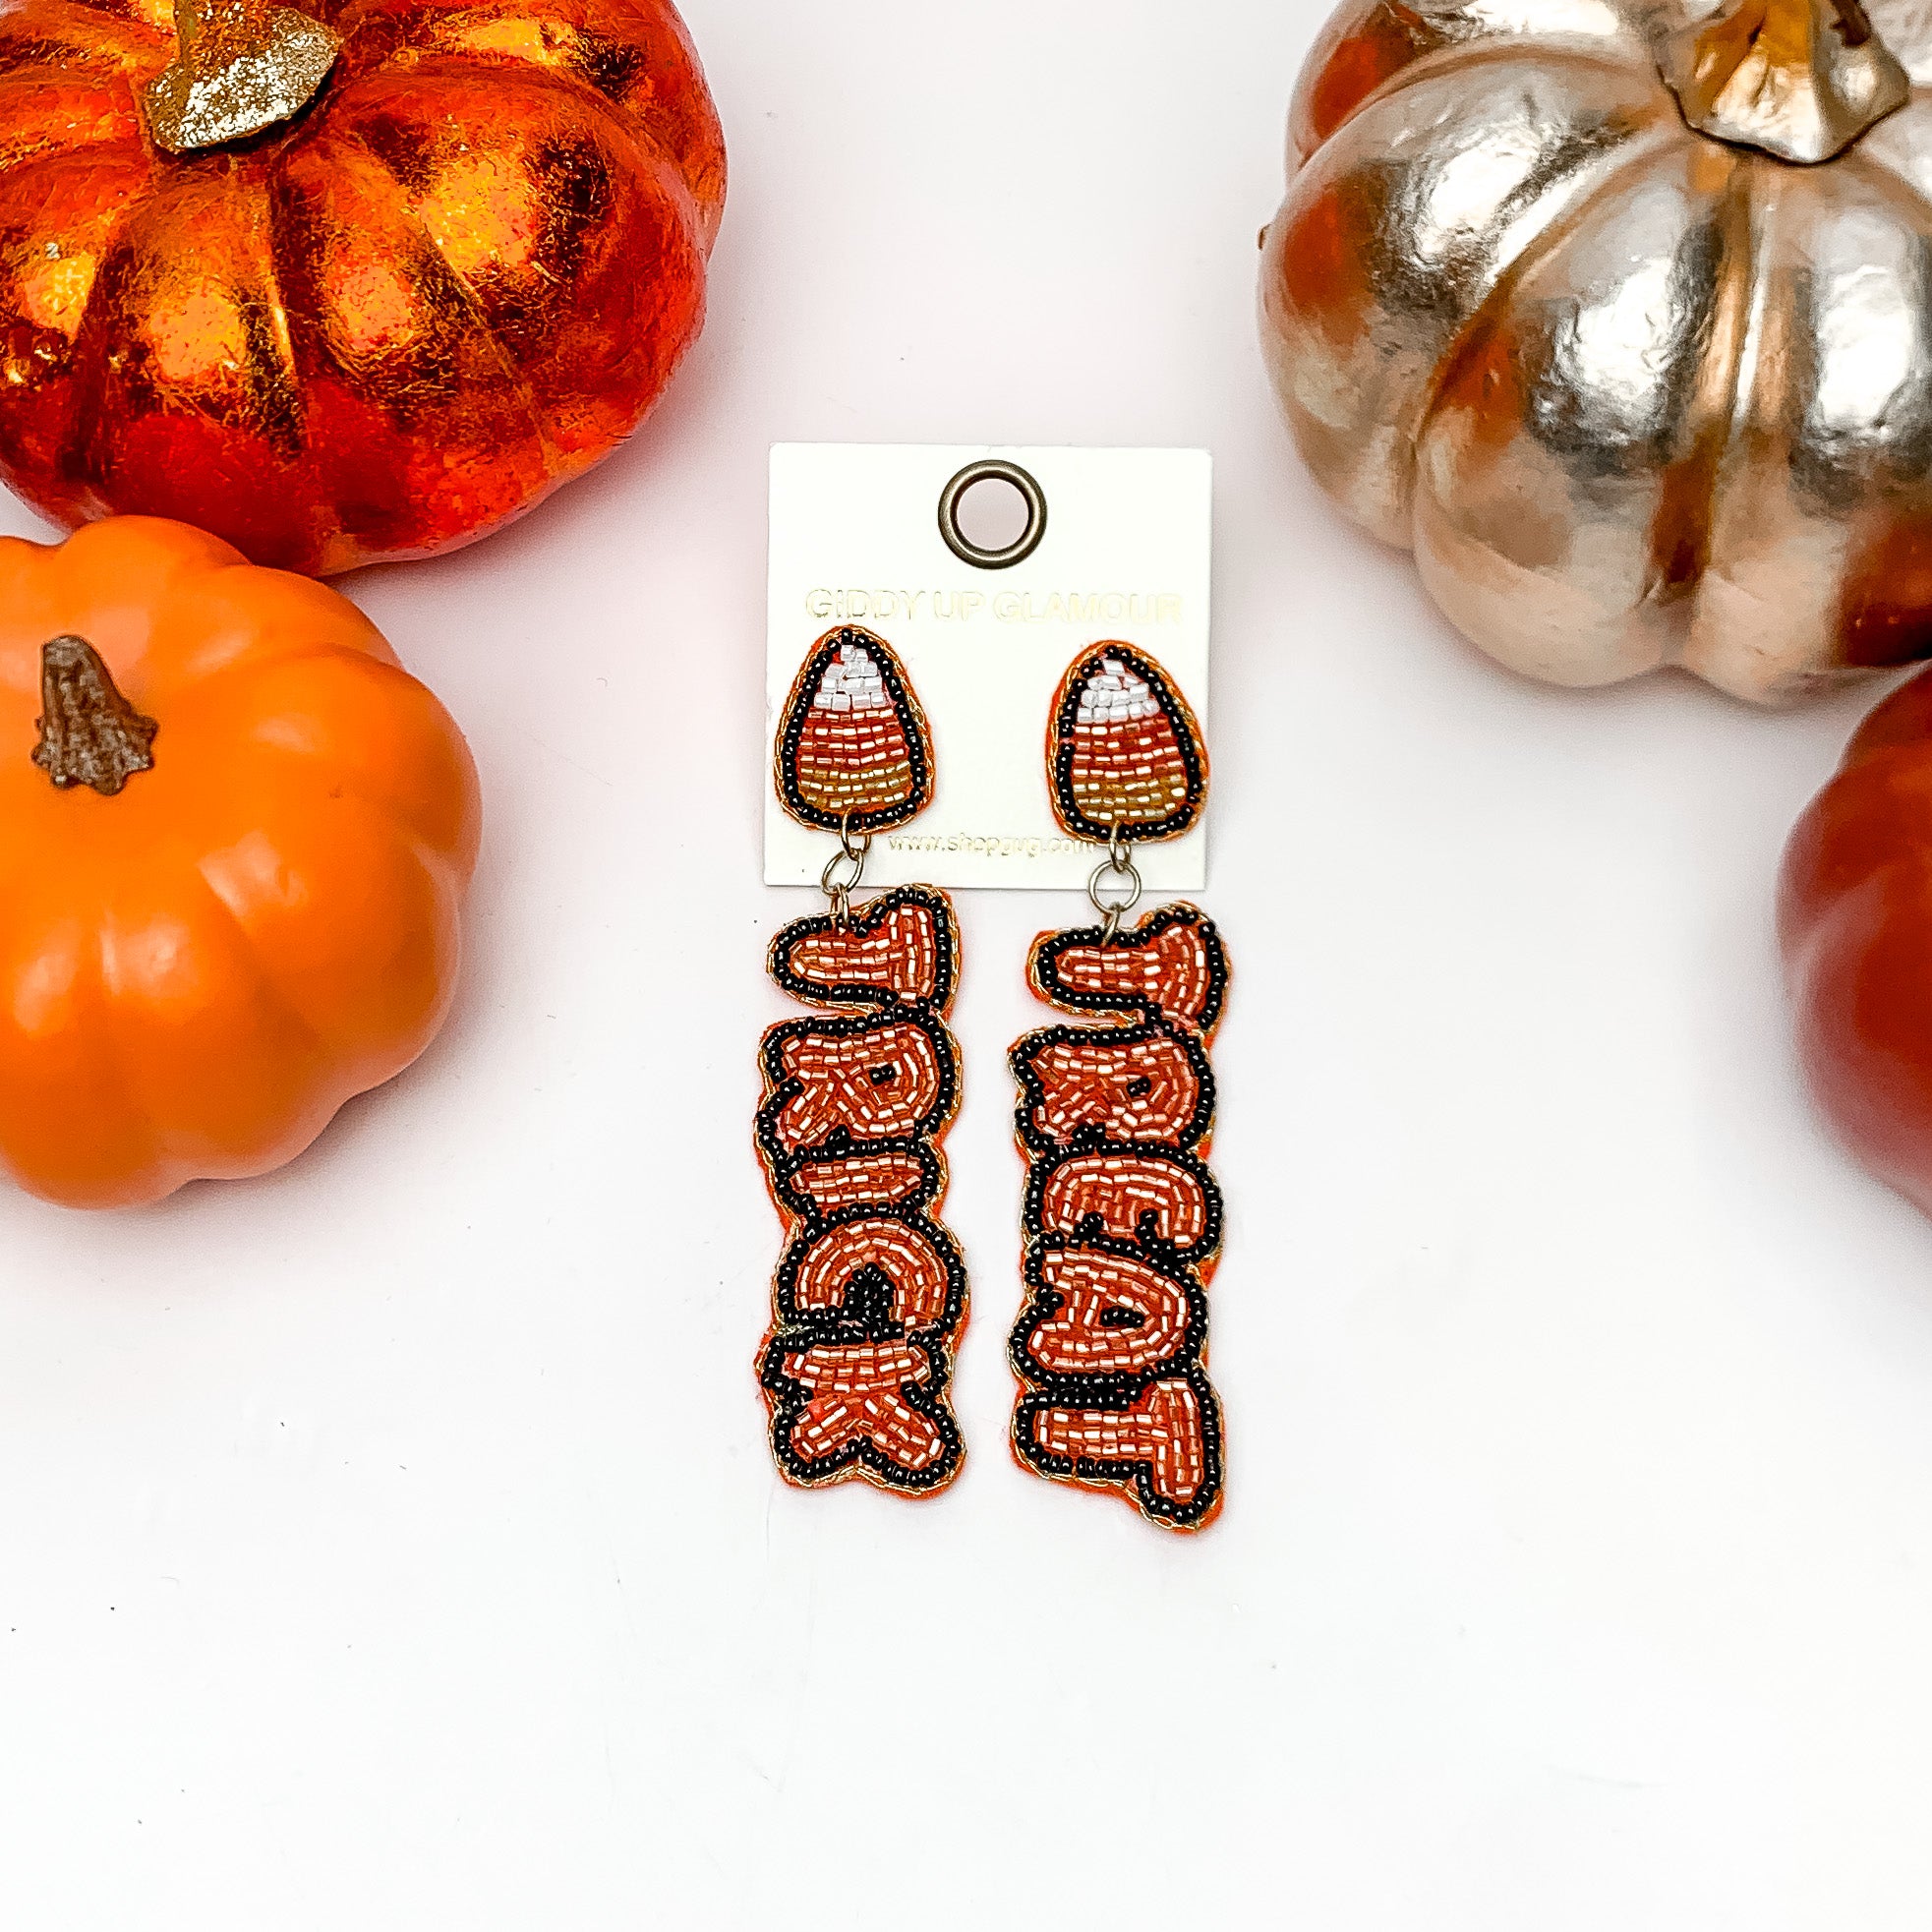 Trick or Treat Halloween Beaded Earrings in Orange and Black. These earrings are on a white background with orange and silver pumpkins around them.